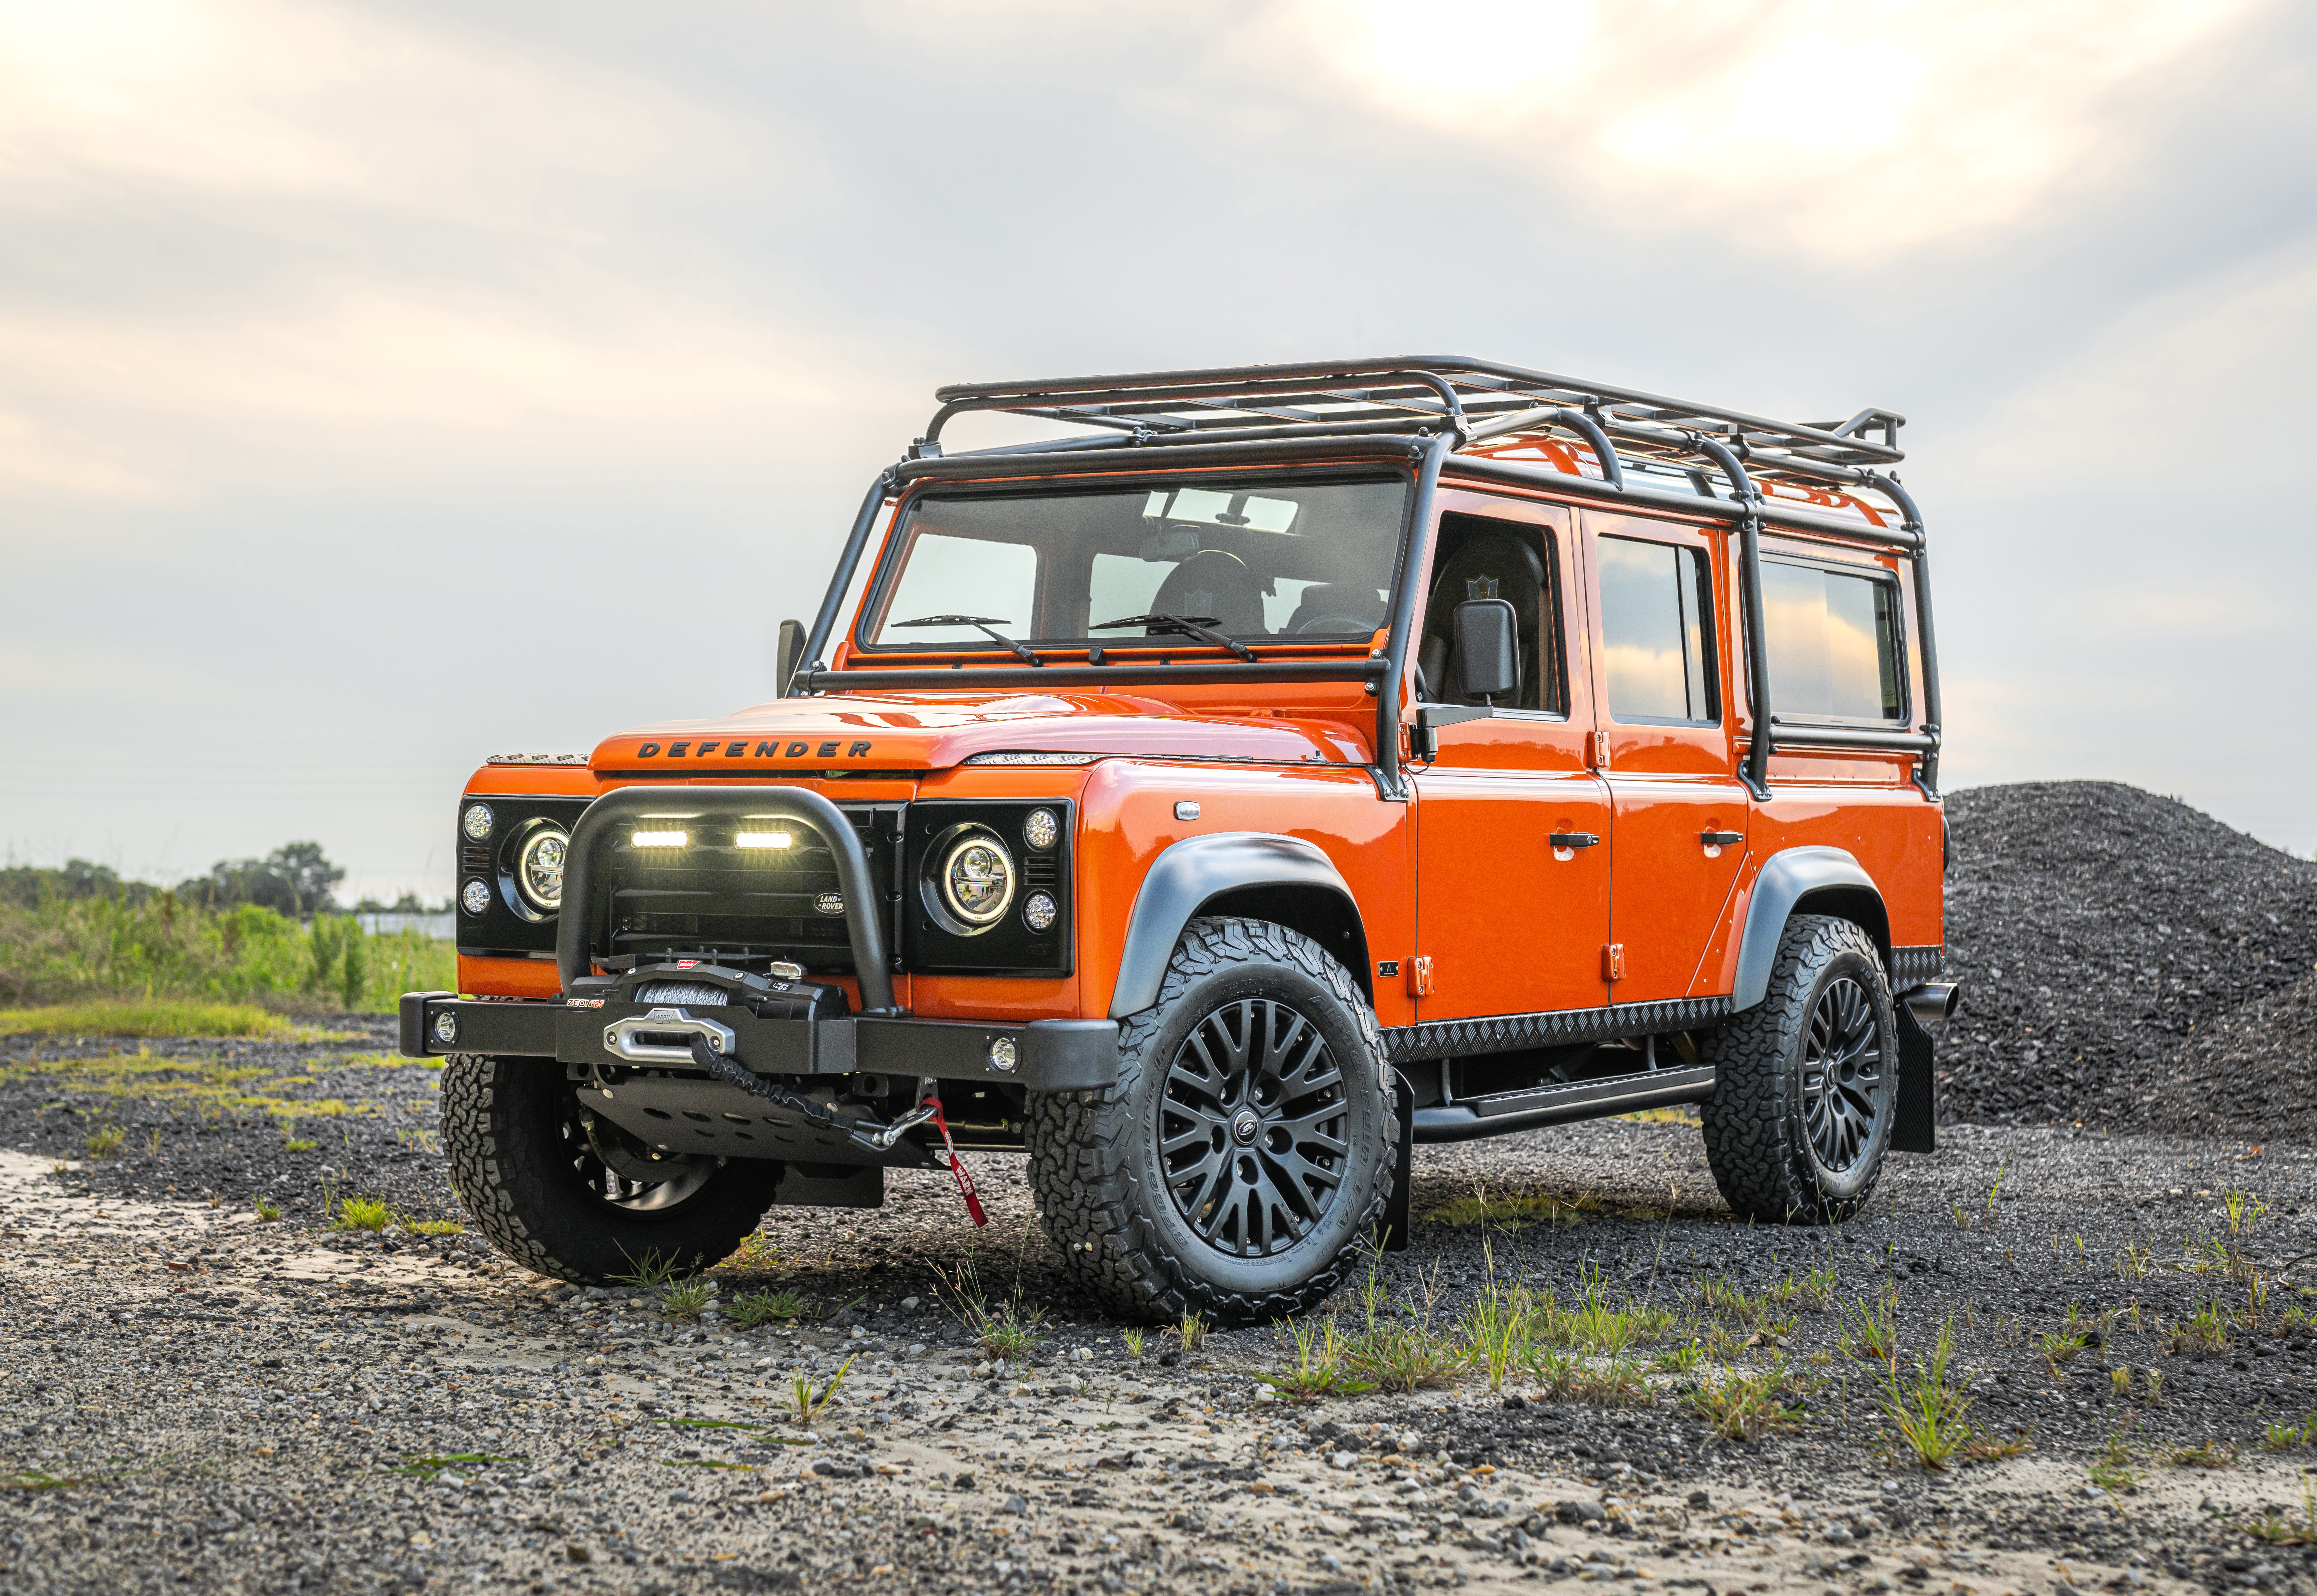 Why These Custom Land Rover Defenders Are The Ultimate British SUVs